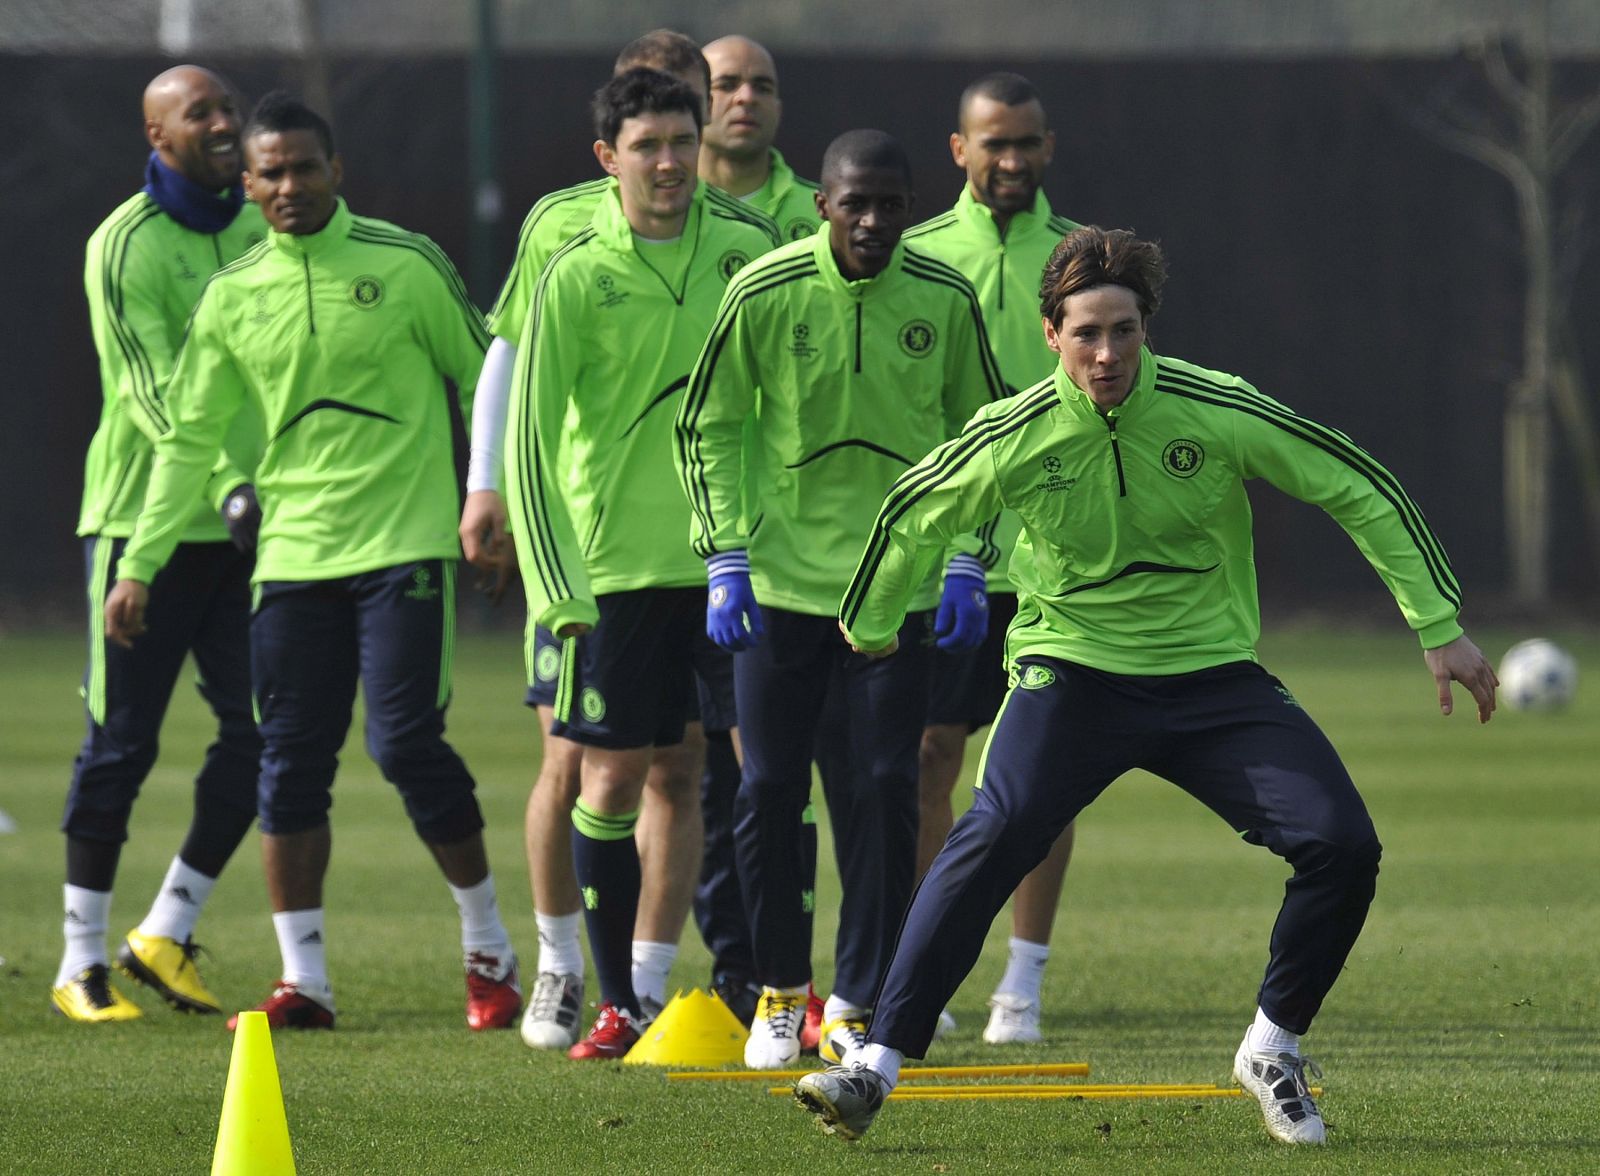 Fernando Torres of Chelsea runs during a training session at Cobham in south east England